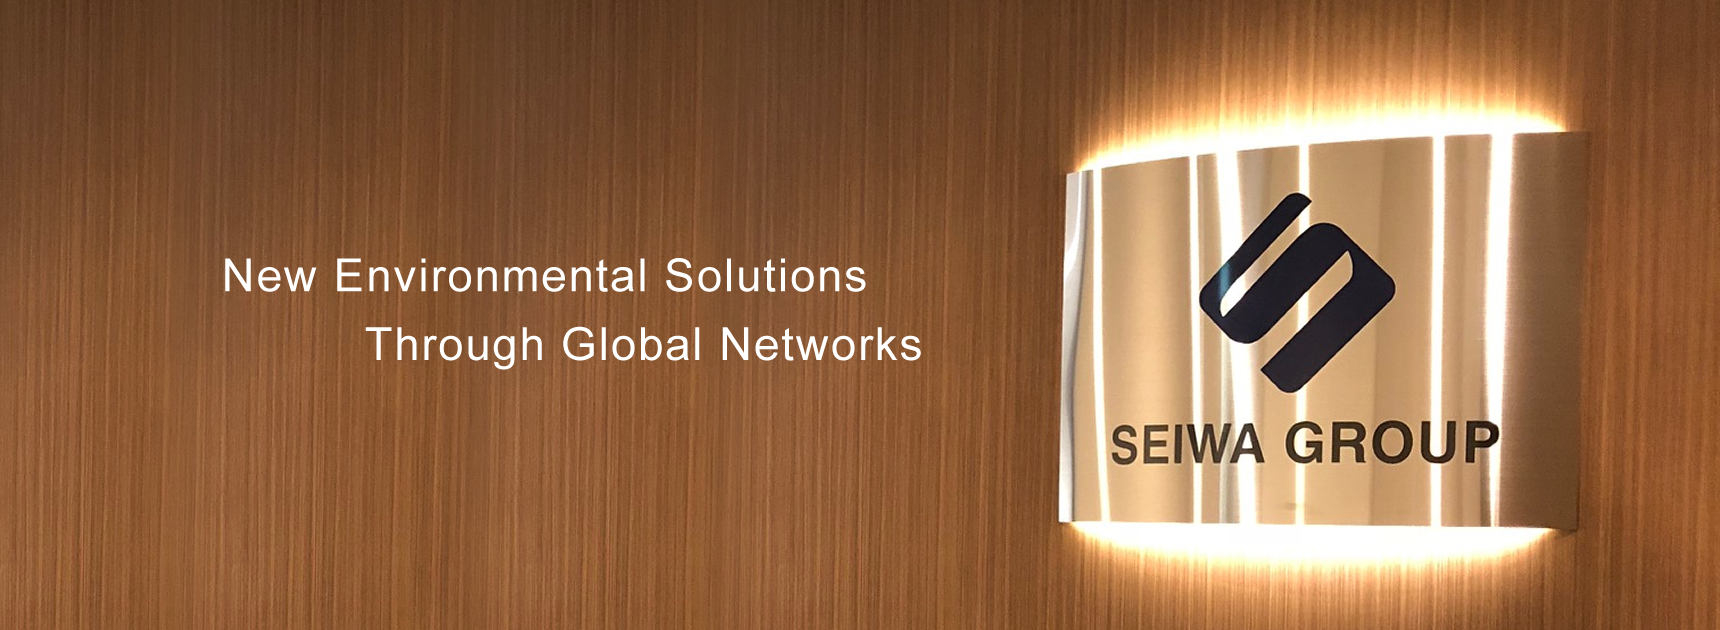 New Environmental Solutions Through Global Networks